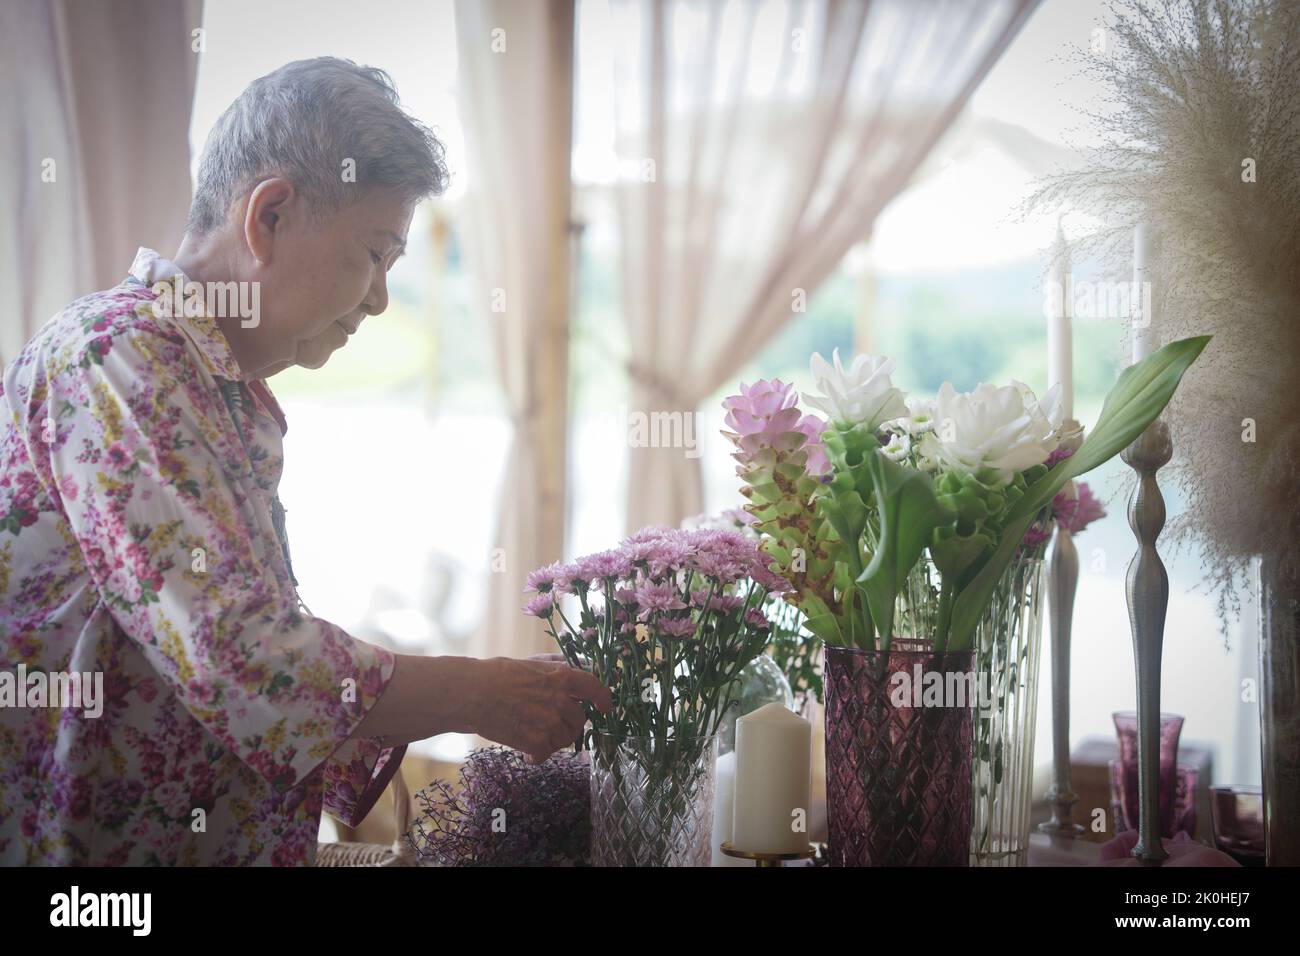 old woman decorate flower bouquet in glass vase on dining table Stock Photo